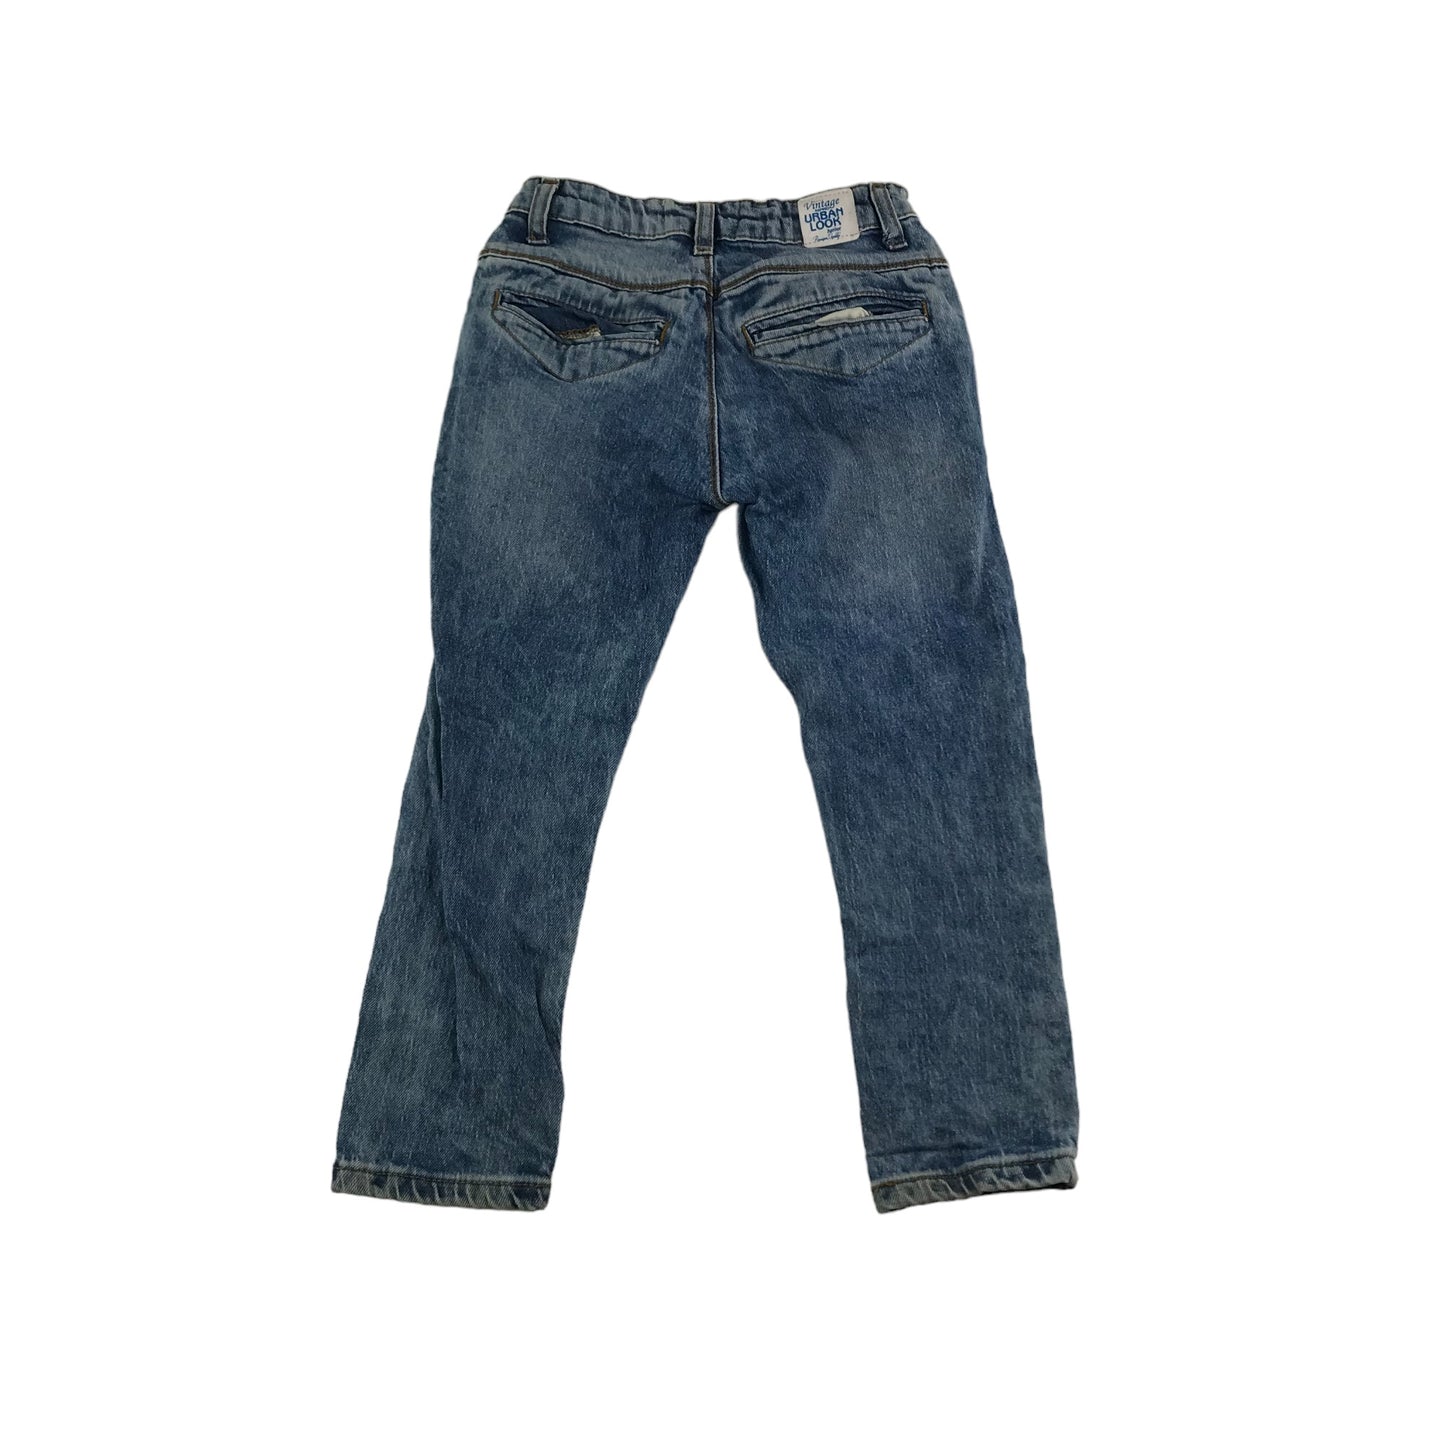 Urban Look Jeans Age 6 Blue Stone Wash Effect